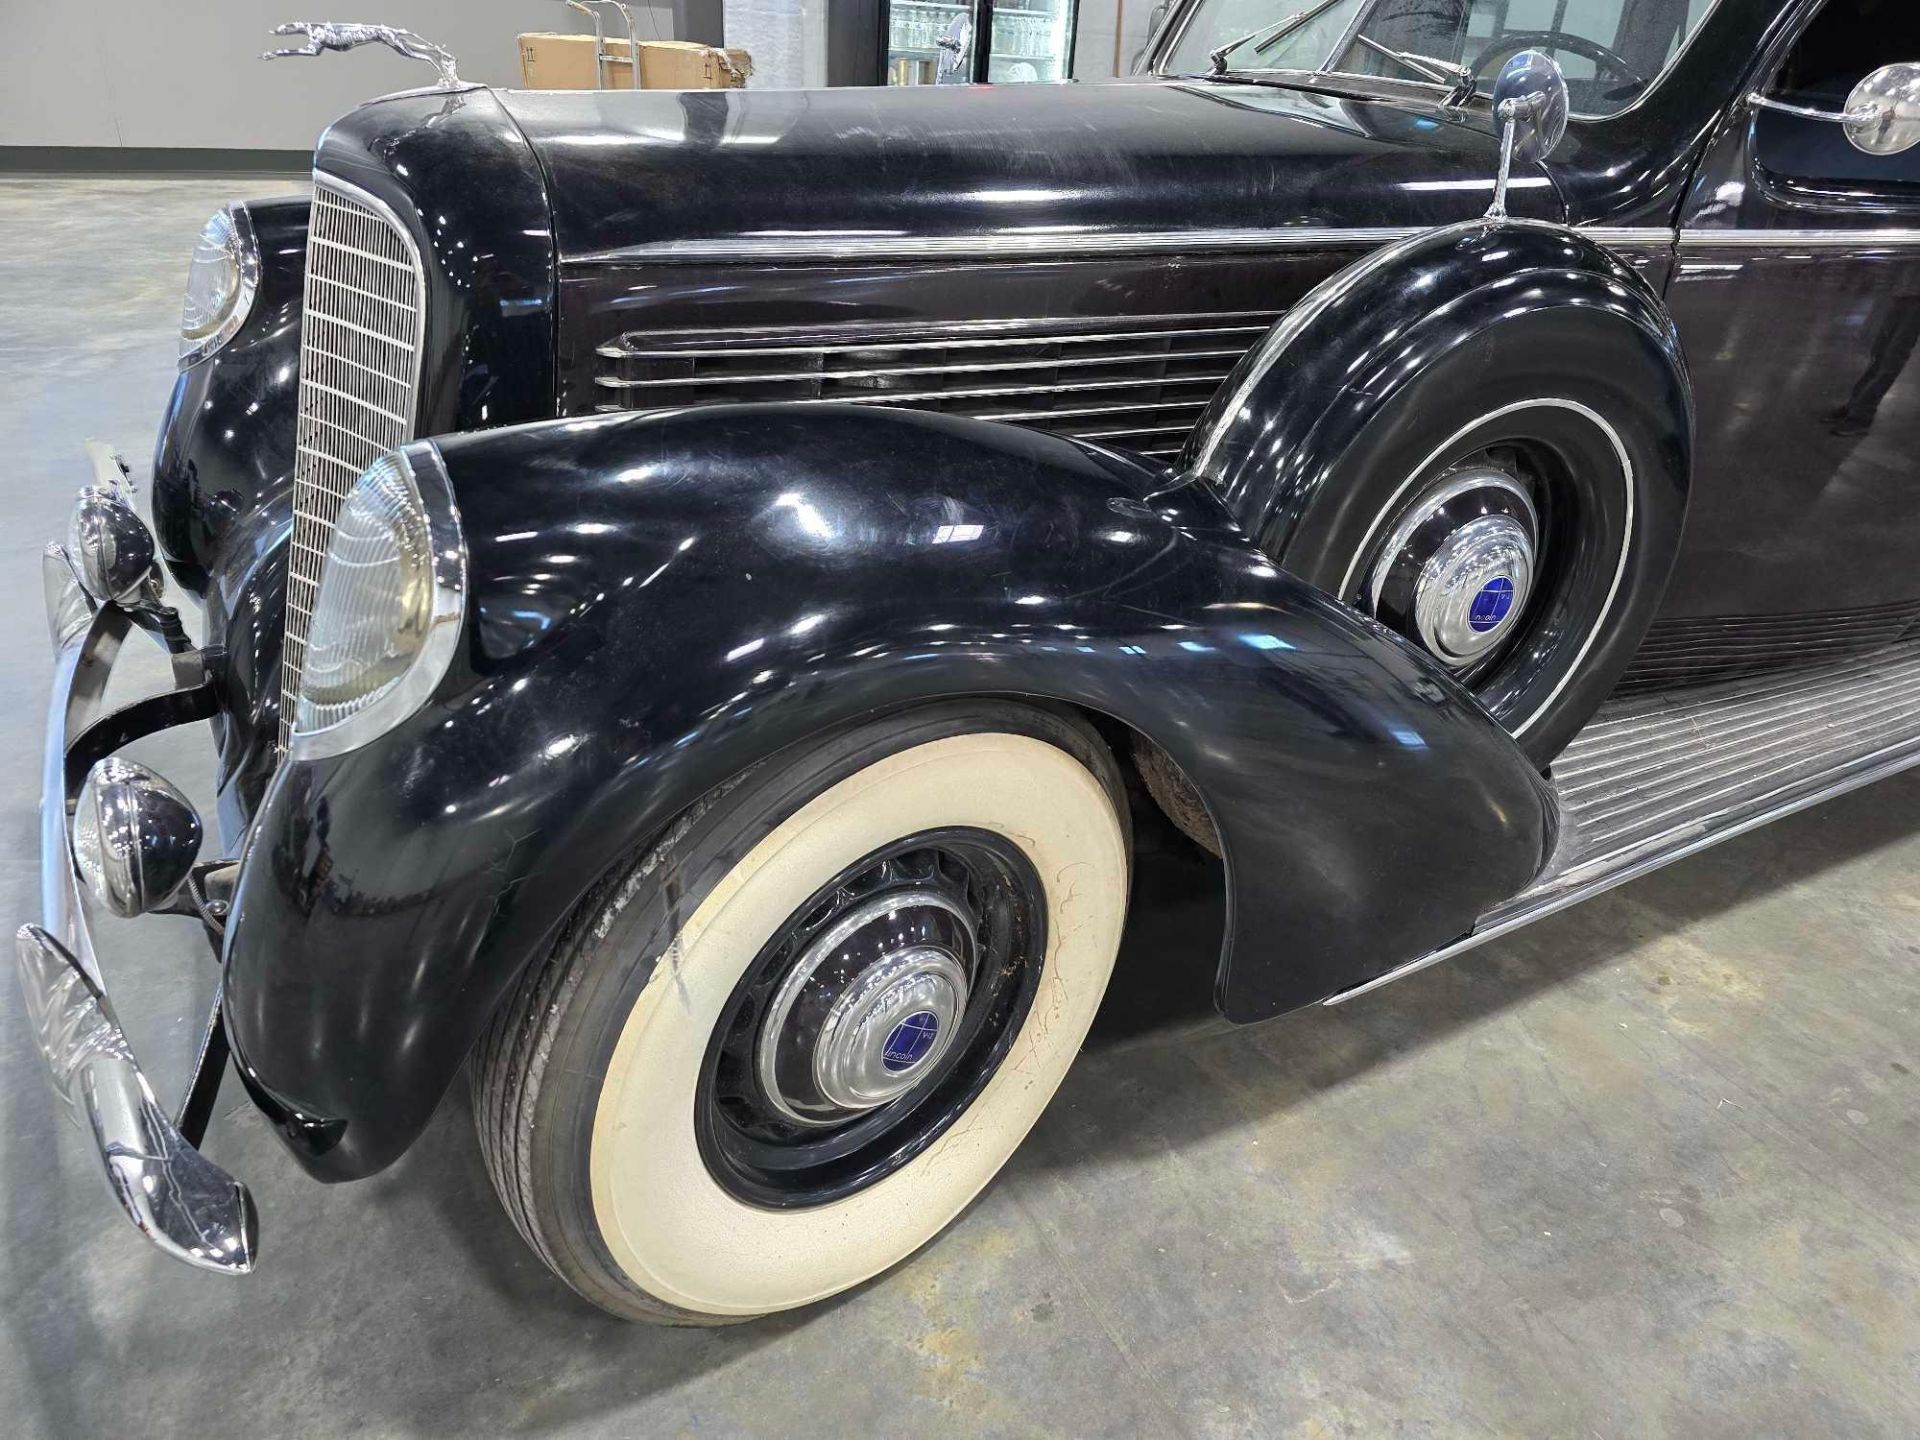 1938 Lincoln Model K v12 (last ran 4 years ago, we believe it needs new gas and a battery)  VIN #K91 - Image 3 of 37